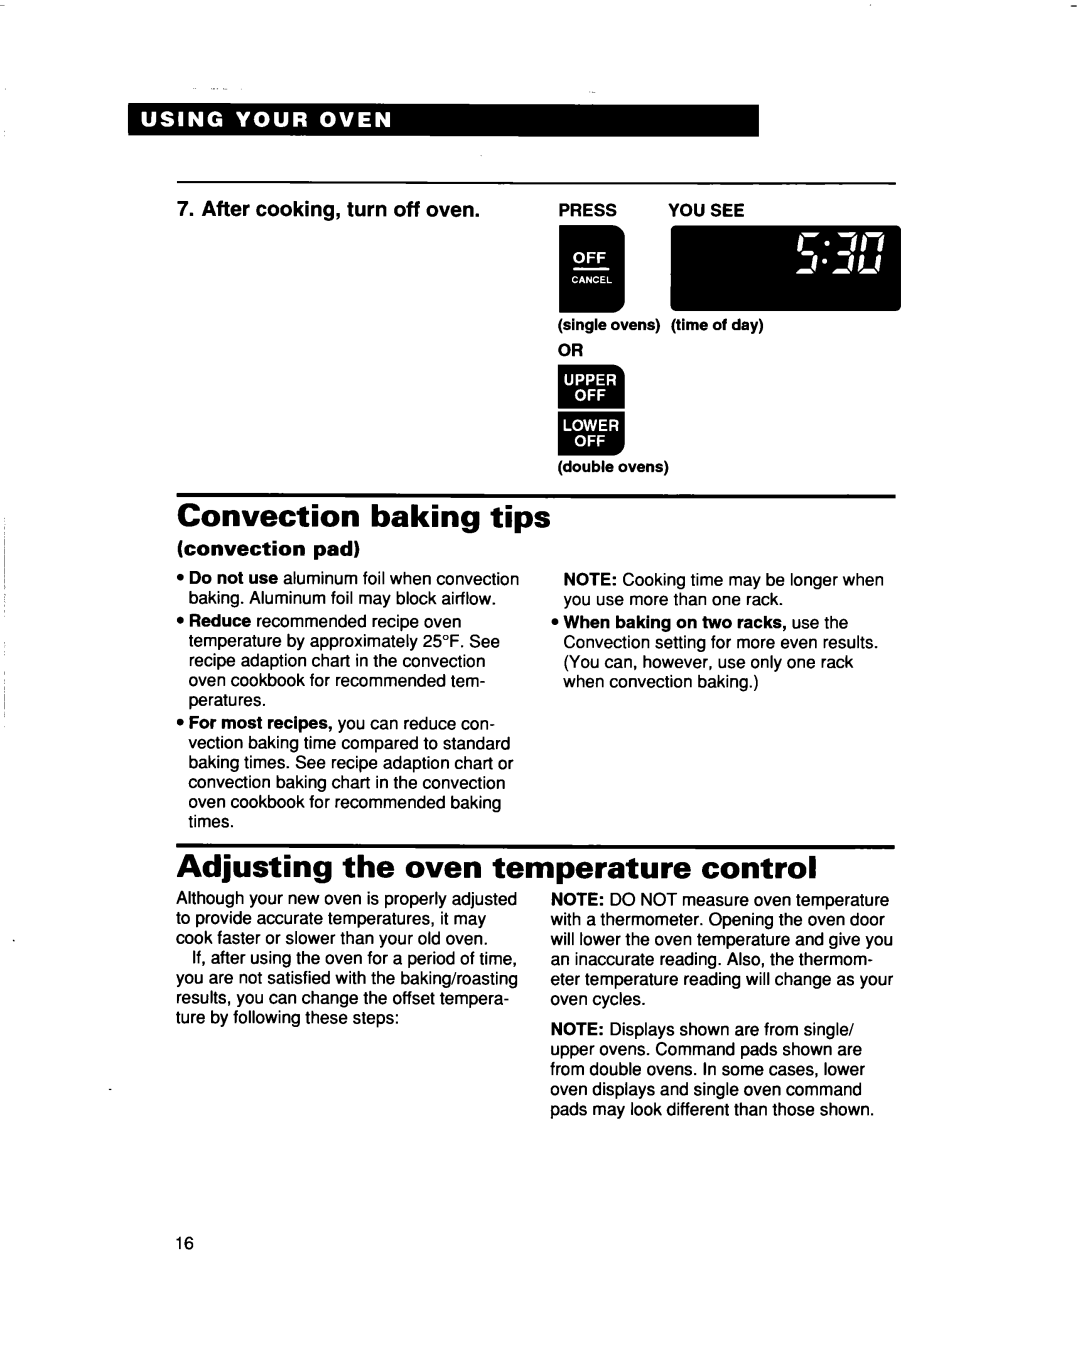 Whirlpool RBS307PD, RBS277PD Convection baking tips, Adjusting the oven temperature control, After cooking, turn off oven 